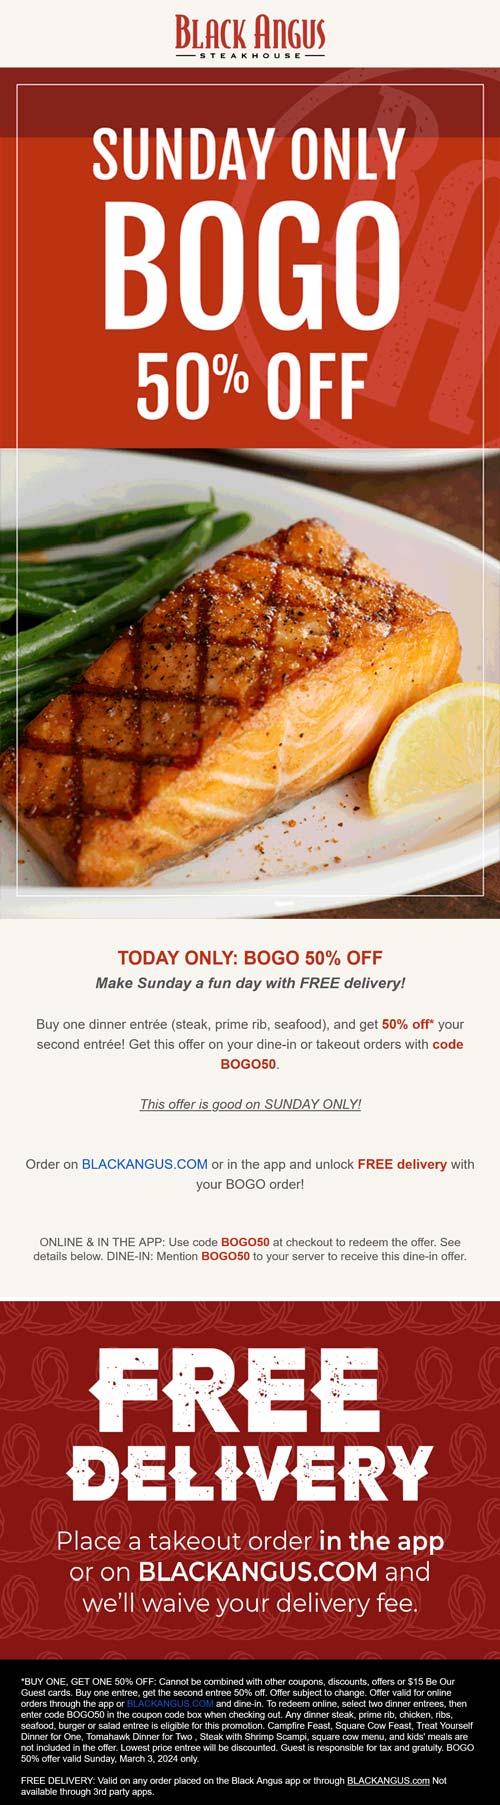 Black Angus restaurants Coupon  Second entree 50% off + free delivery today at Black Angus steakhouse #blackangus 